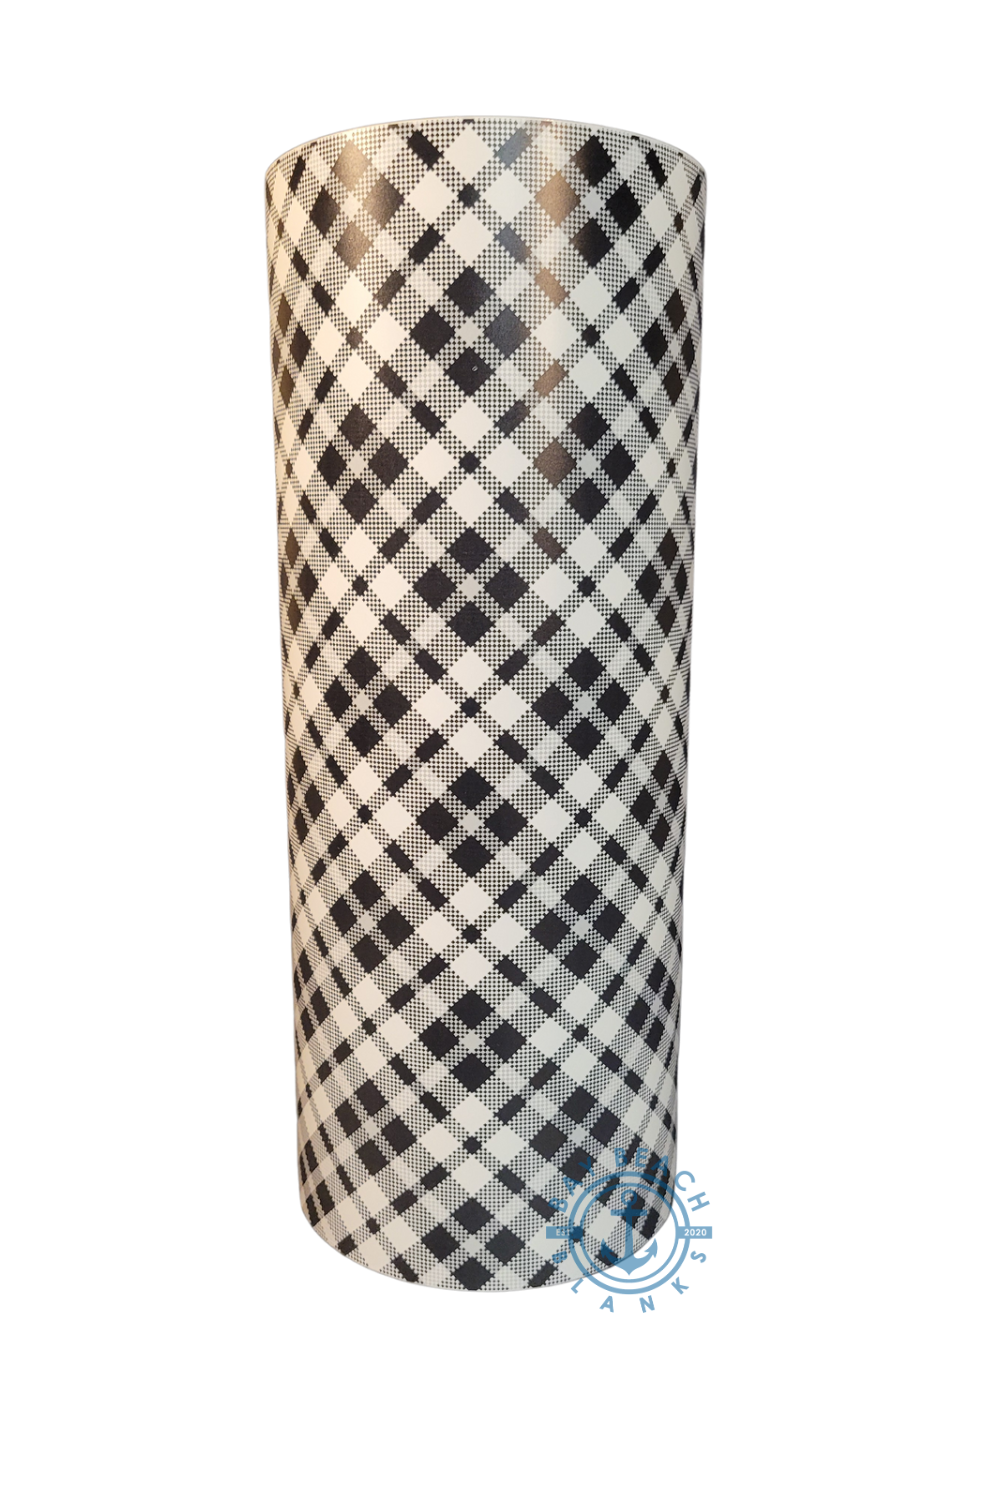 Black and White Plaid -quality adhesive vinyl, sticker crafting vinyl, holographic, mirror, fish scale, tumbler makers, Starbucks cold cup vinyl, Crystalac / Hyperion tumblers, travel cups, Epoxy tumbler makers, Niagara Falls Ontario Canada Craft supplies